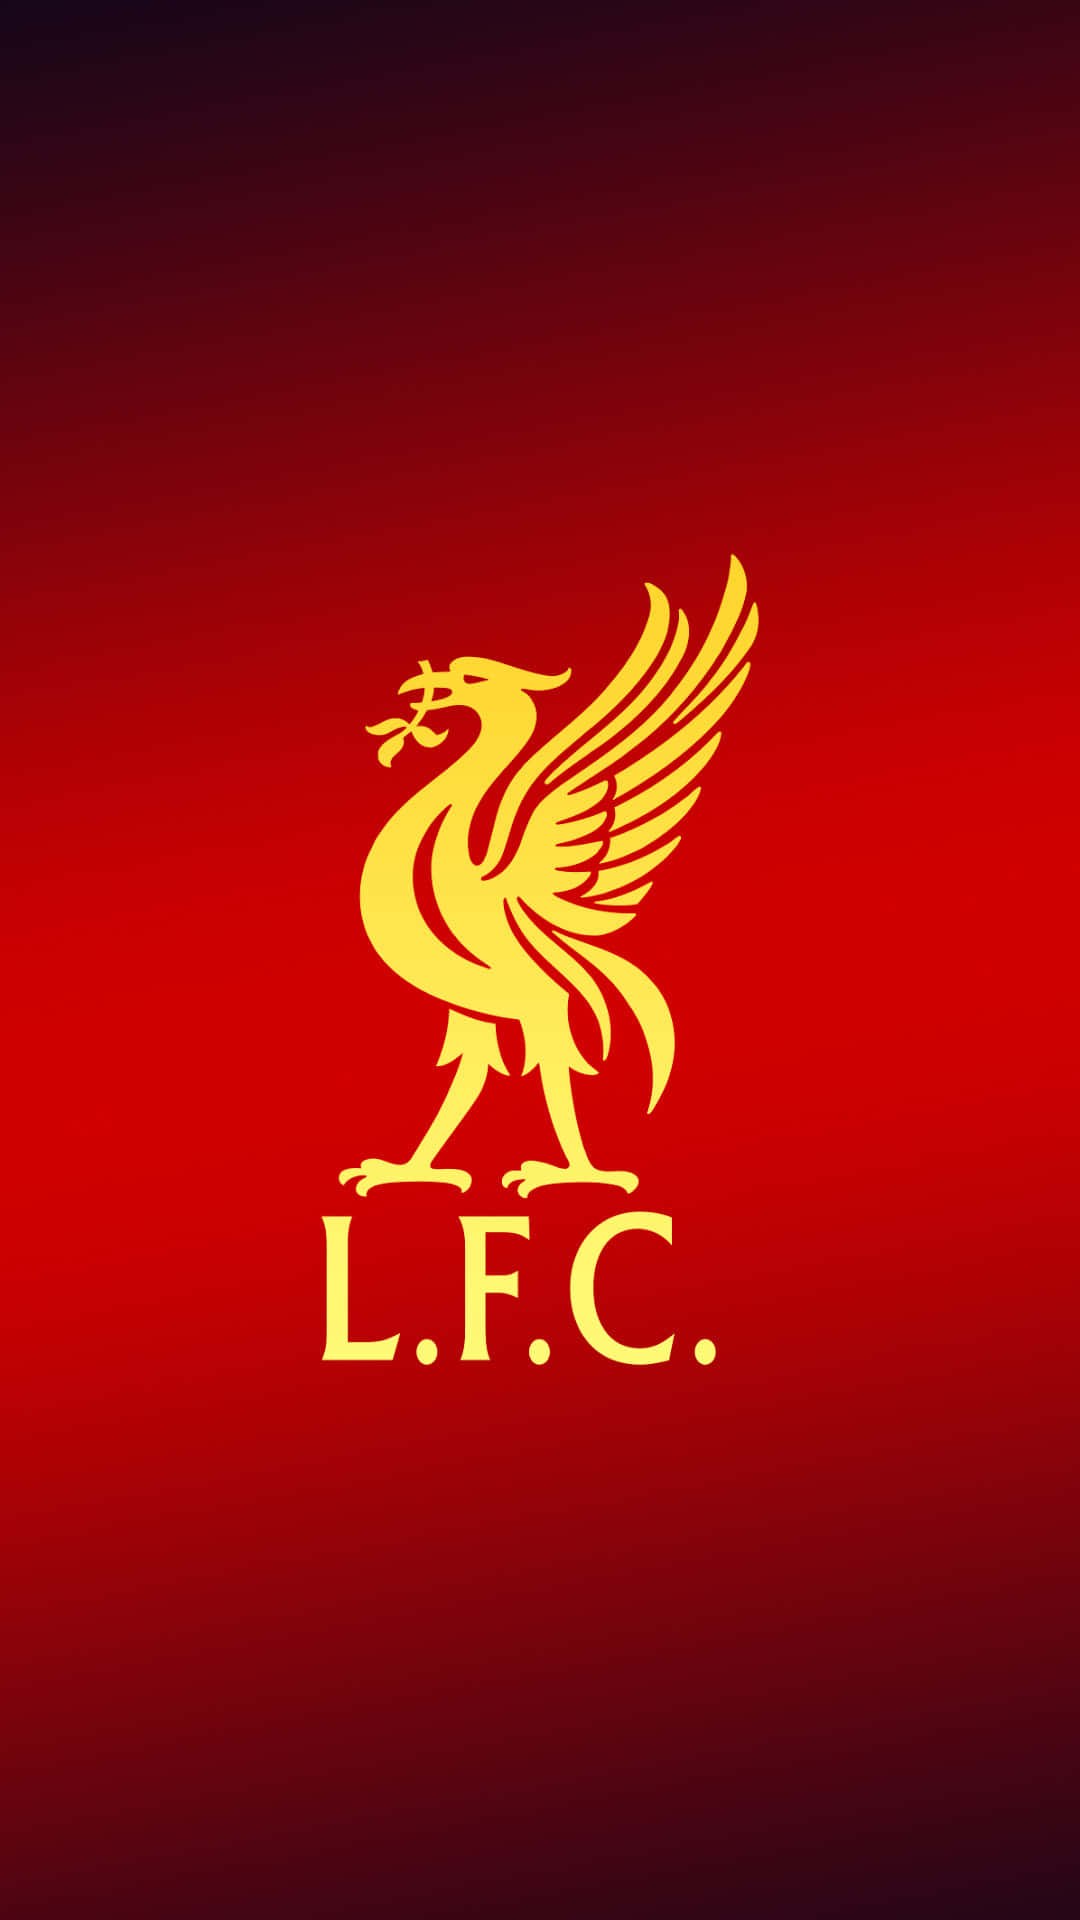 The Official Logo of Liverpool FC on an Iphone Wallpaper